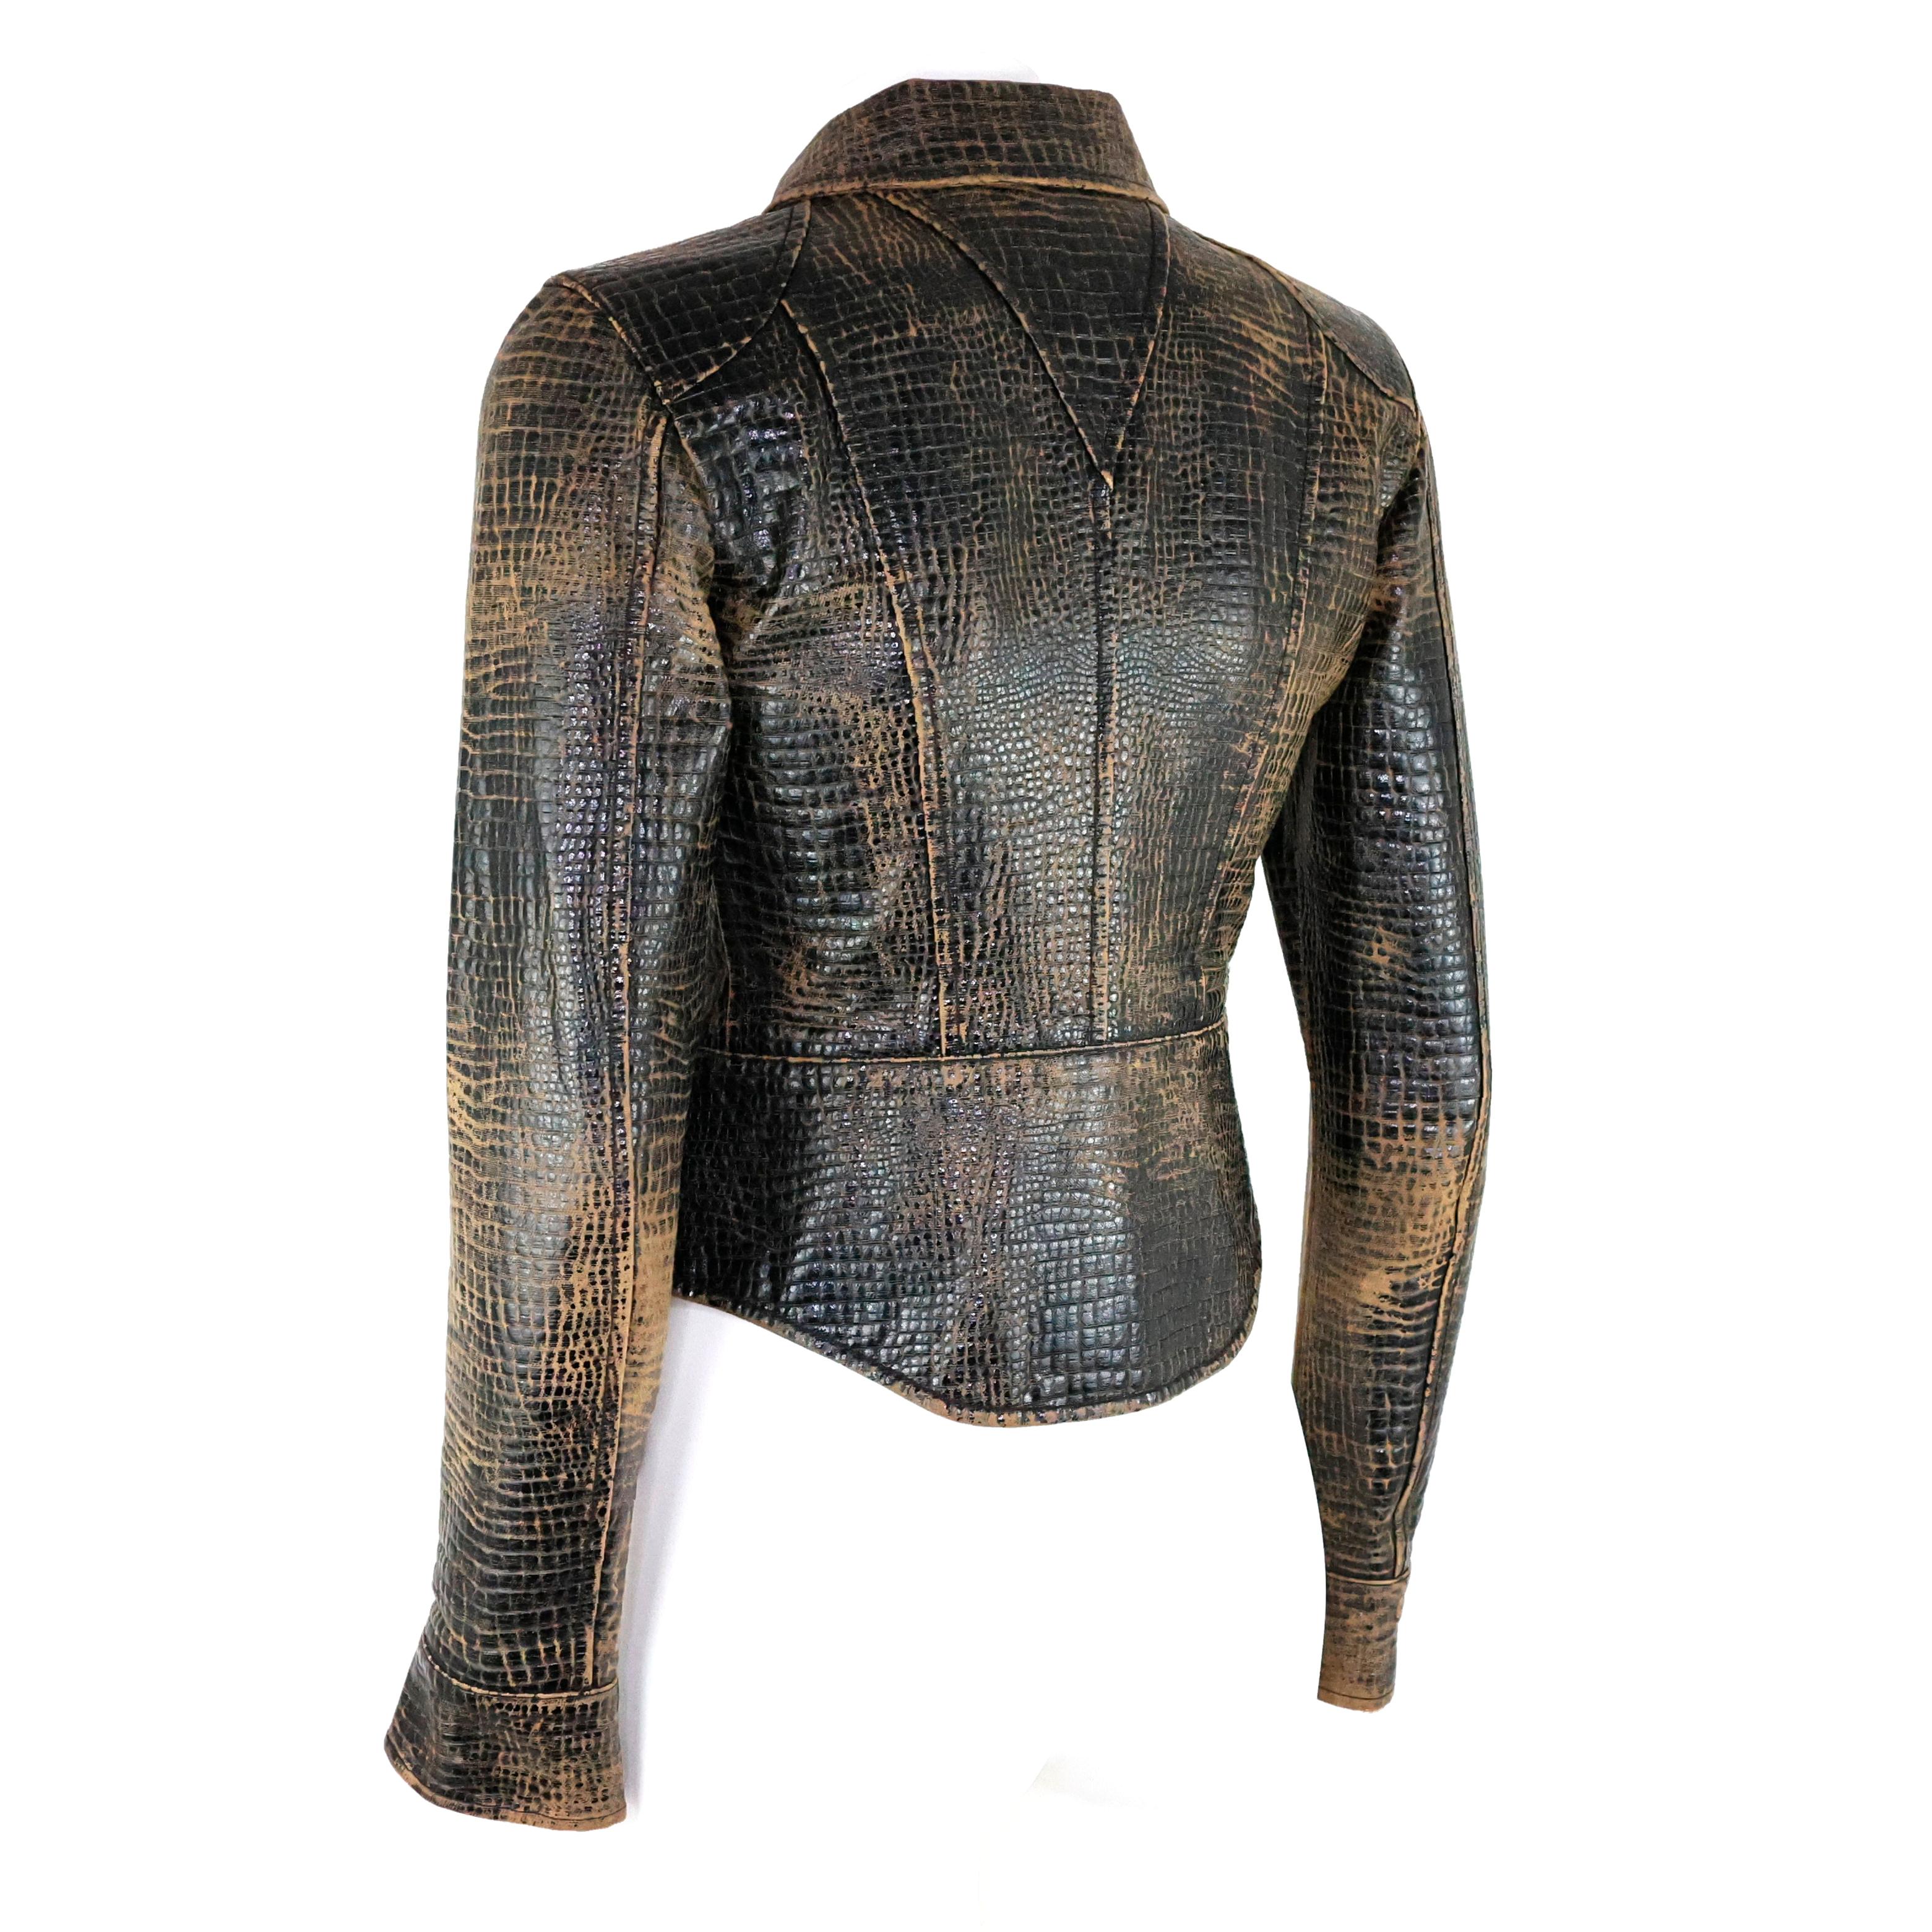 Chanel Croco Embossed Distressed Jacket 1